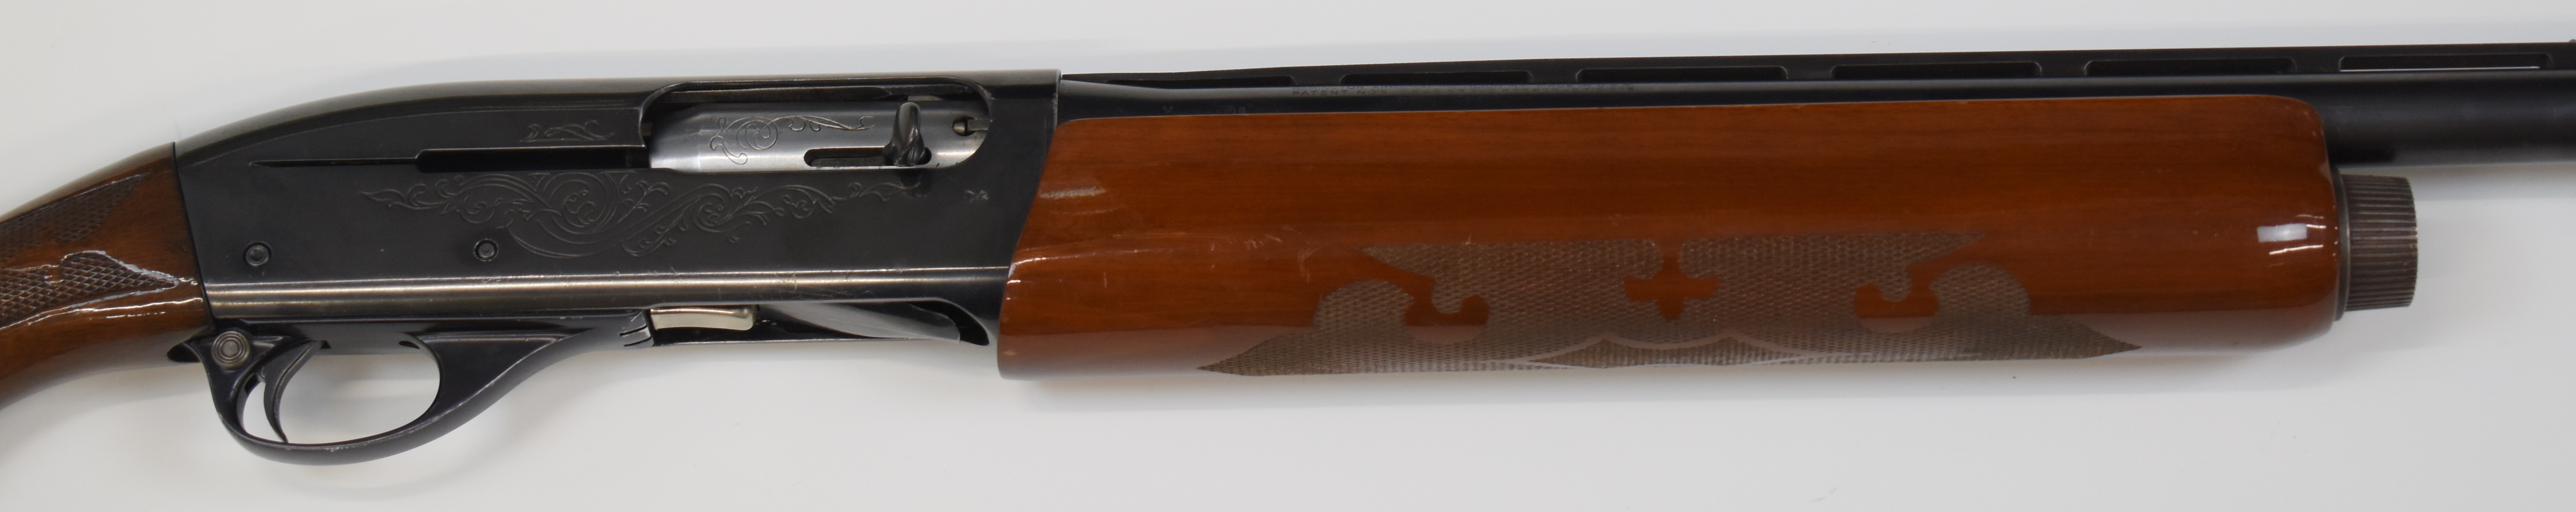 Remington Model 1100 12 bore 3-shot semi-automatic shotgun with ornately carved and chequered semi- - Image 4 of 10